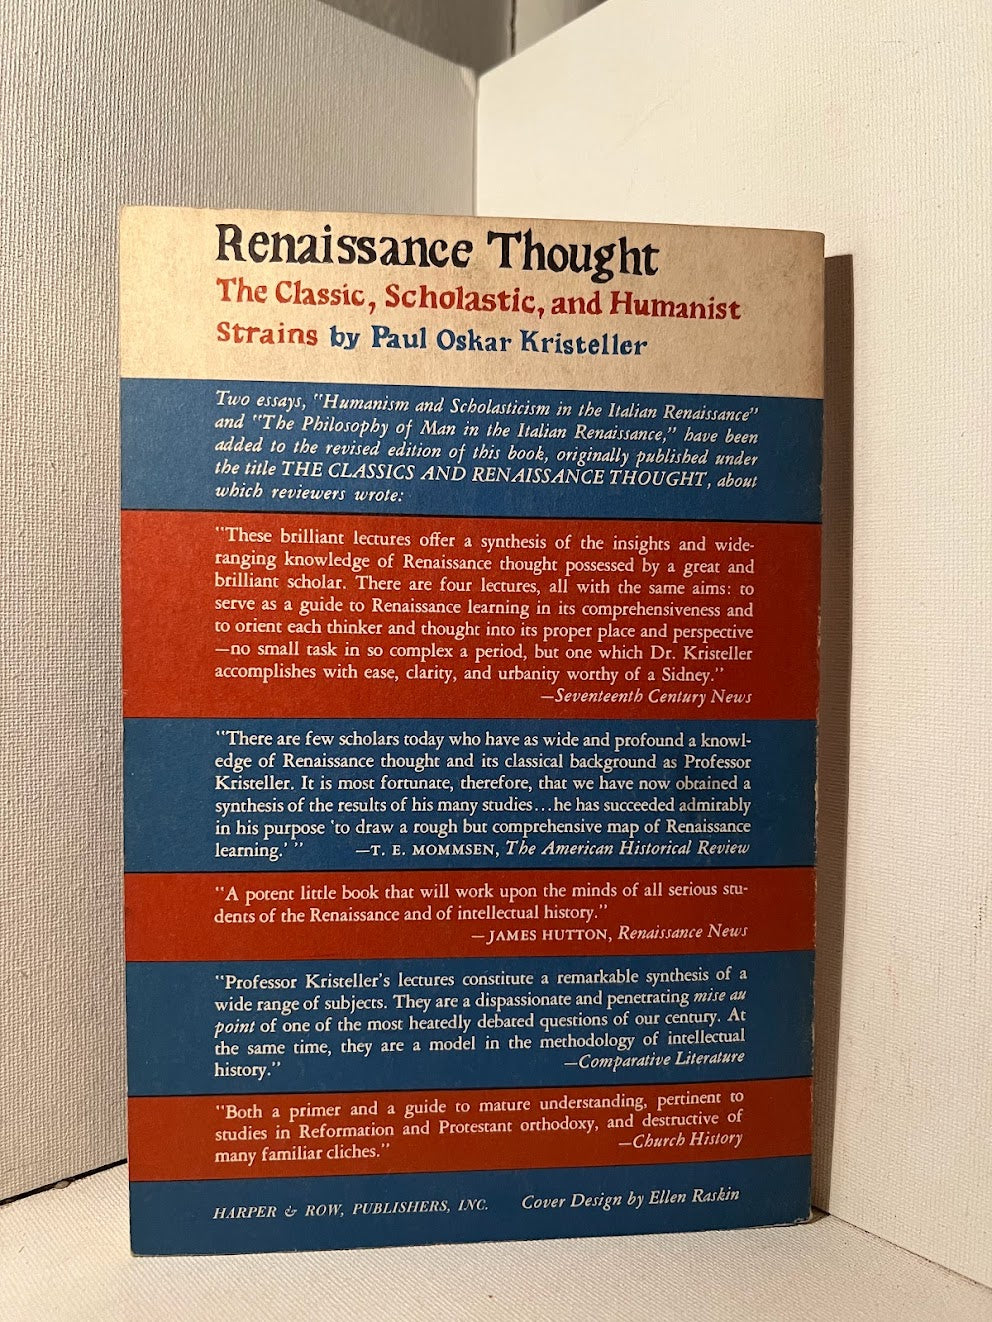 Renaissance Thought: The Classic, Scholastic, and Humanist Strains by Paul Oskar Kristeller